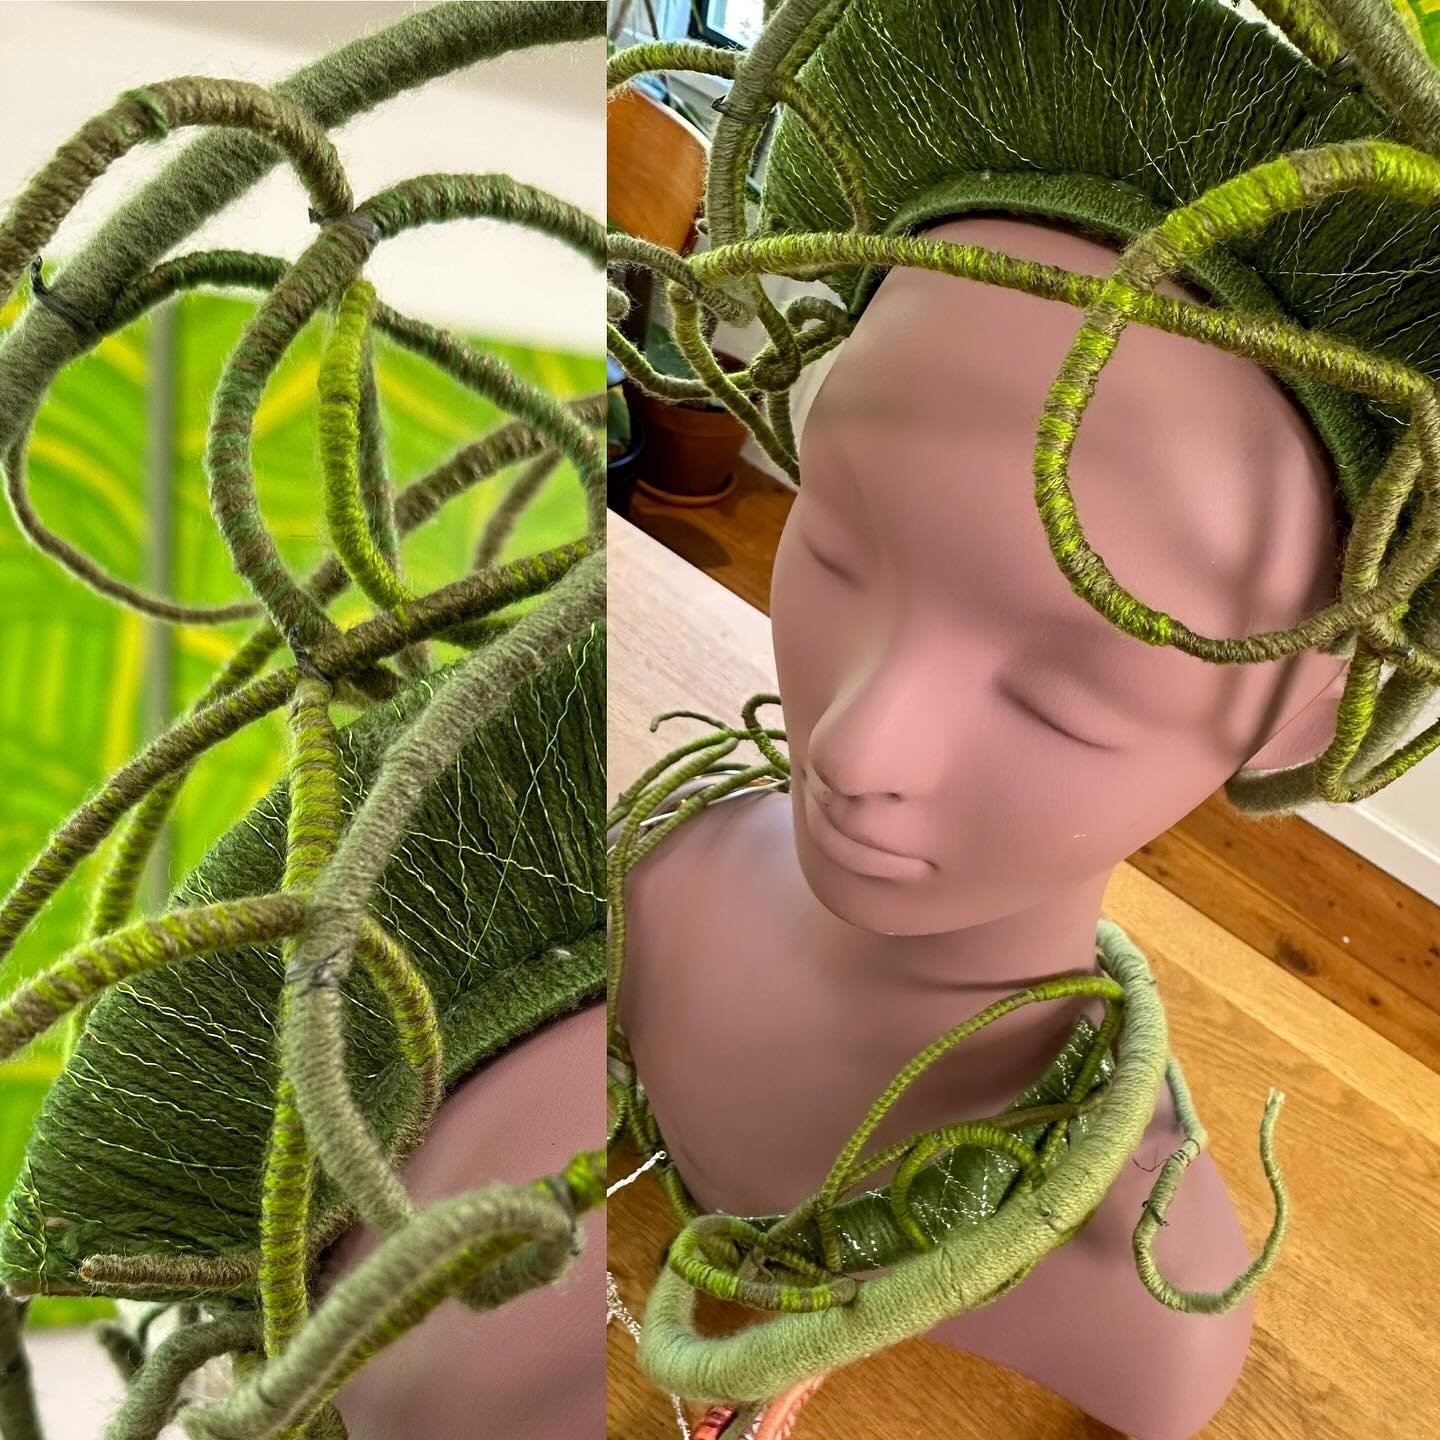 Ready to flower the structures from &lsquo;Structure Building with Hitomi Virtual Workshop&rsquo;!! Over 15 structural components built and shared during my first 2 intensive virtual sessions on Flowers to Wear segments. Headed to the flower market n